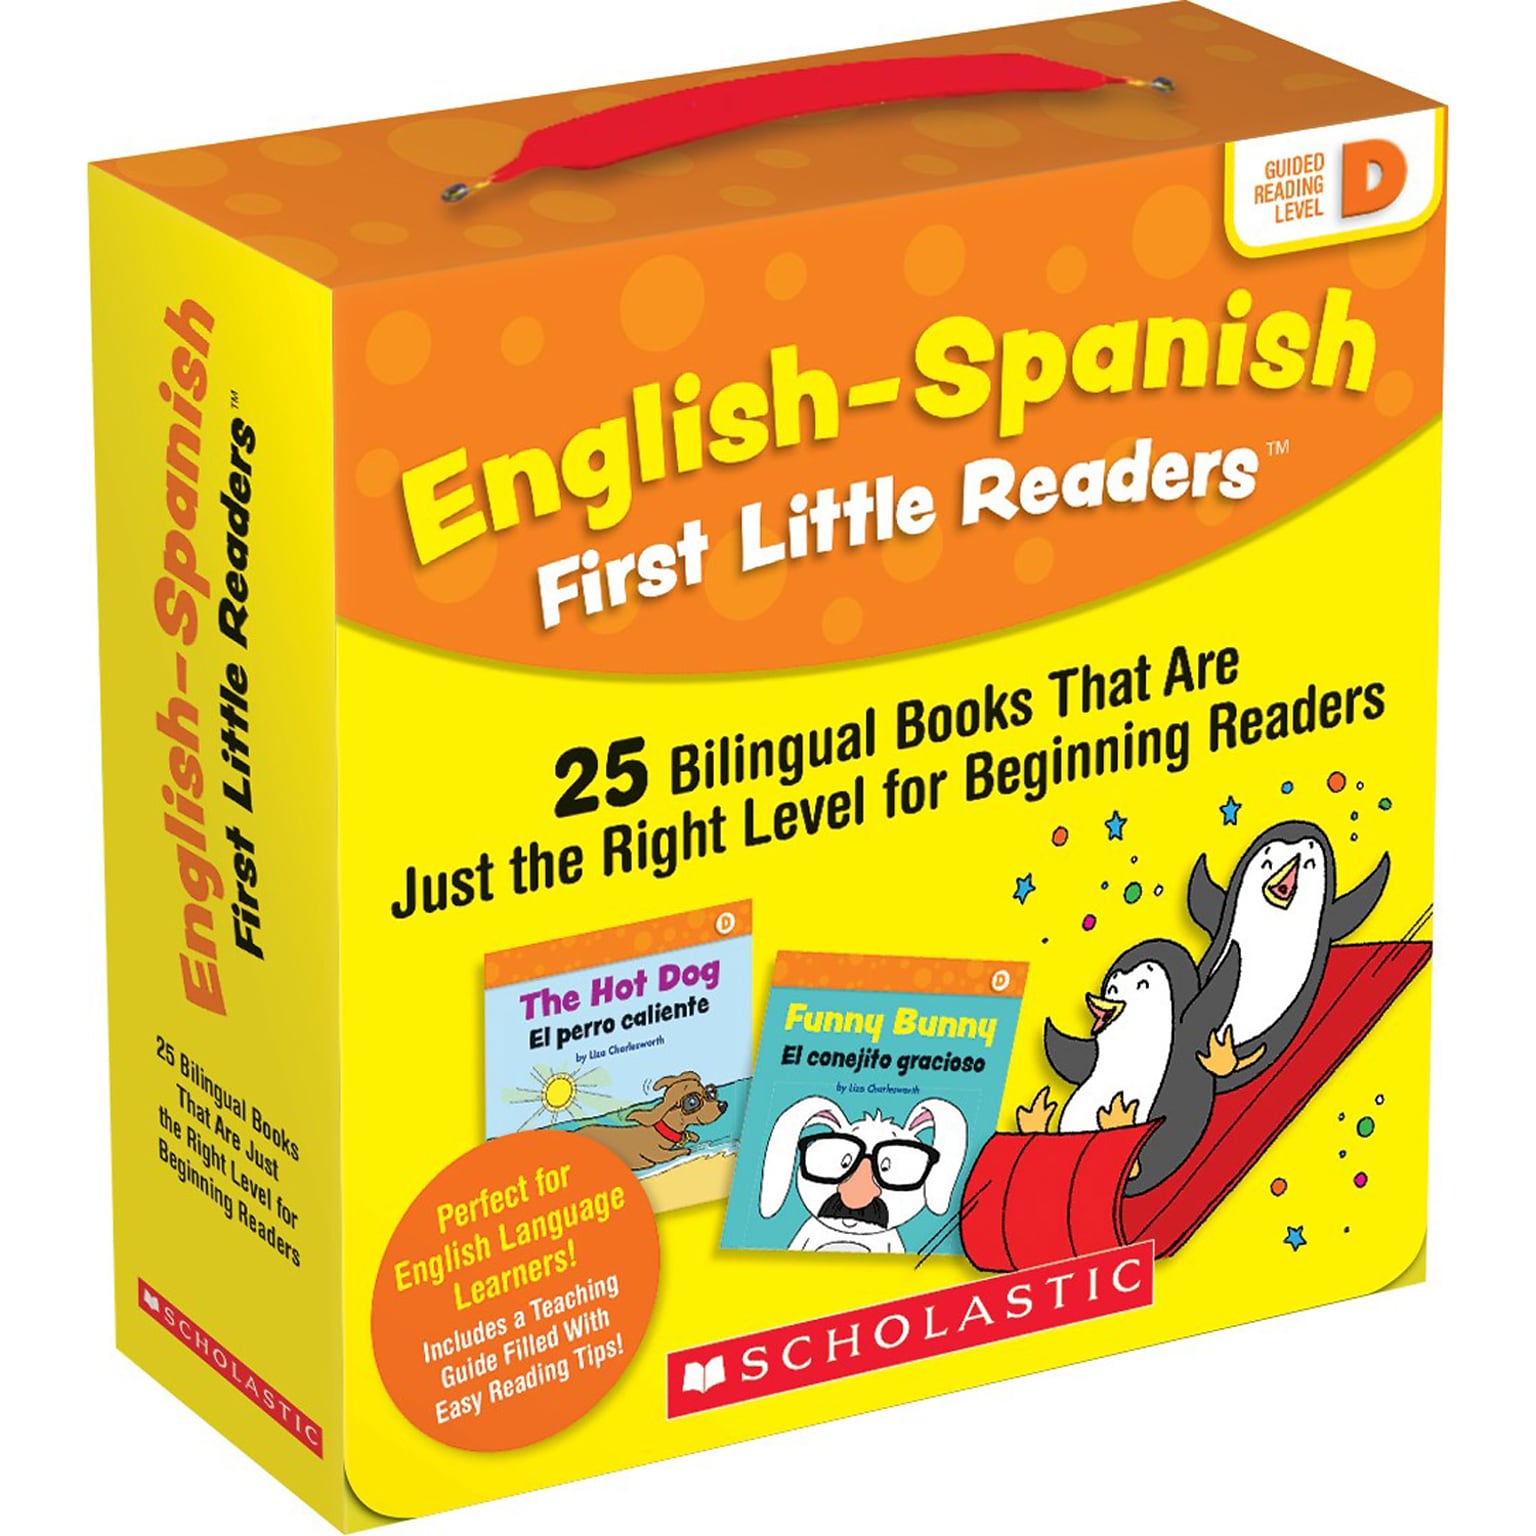 Scholastic Teacher Resources English-Spanish First Little Readers: Guided Reading Level D Parent Pack